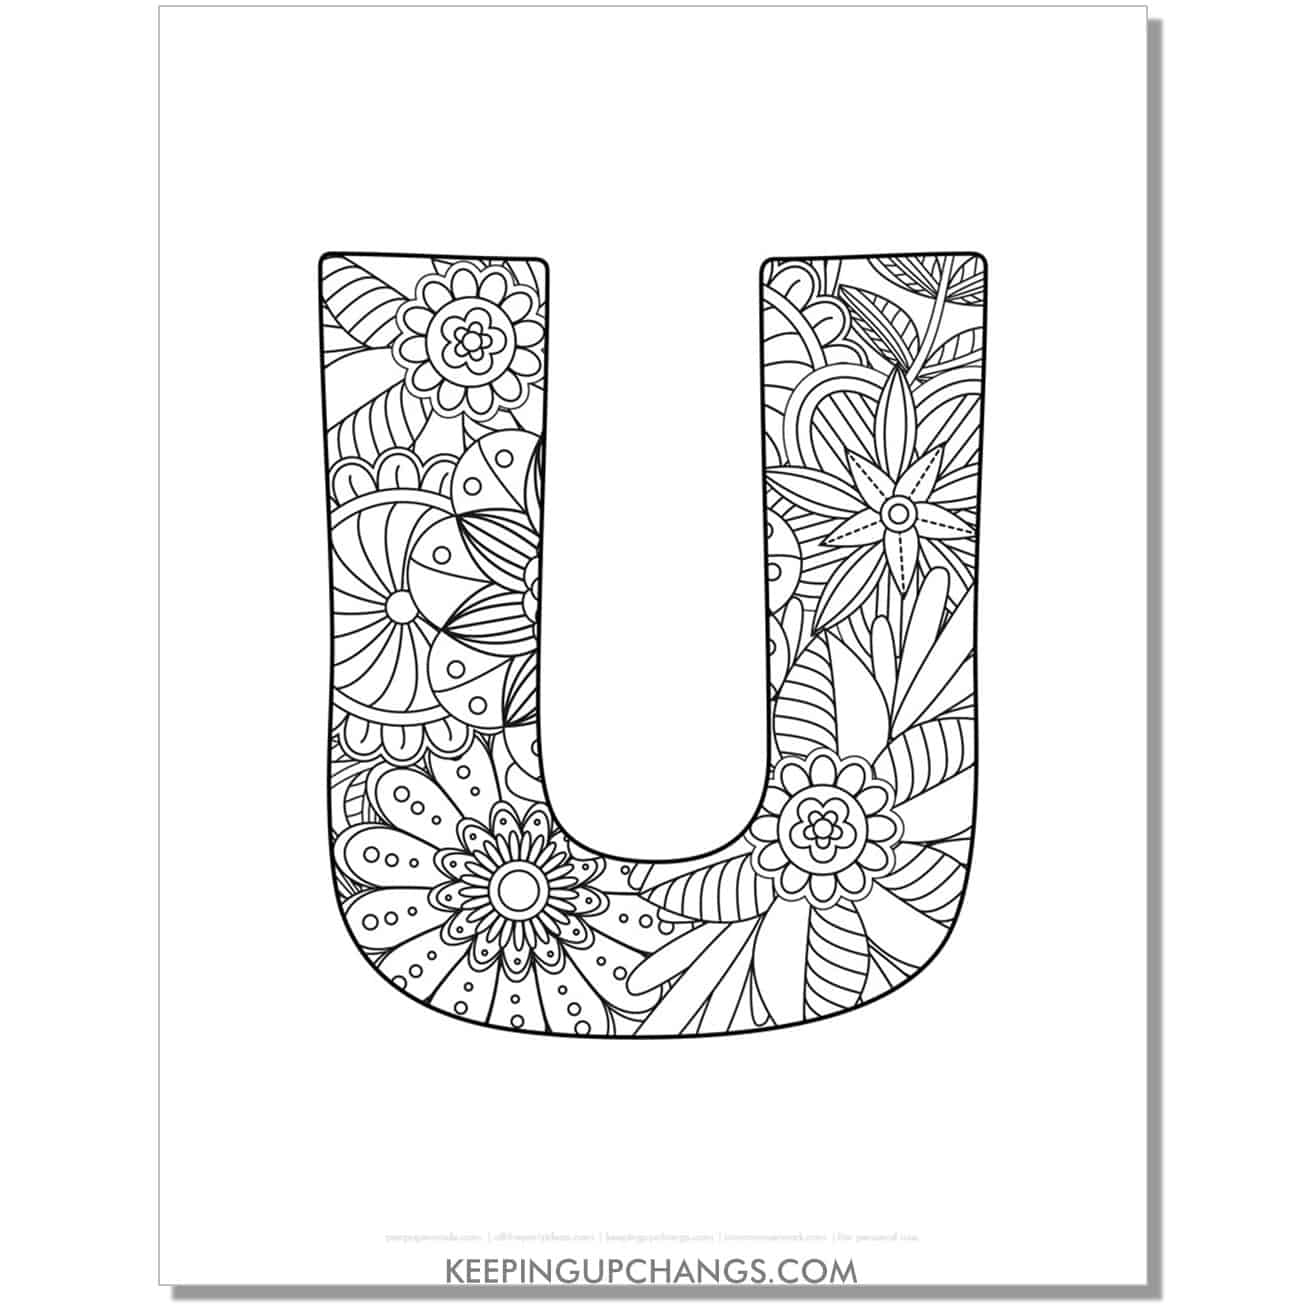 free letter u to color, complex mandala zentangle for adults.